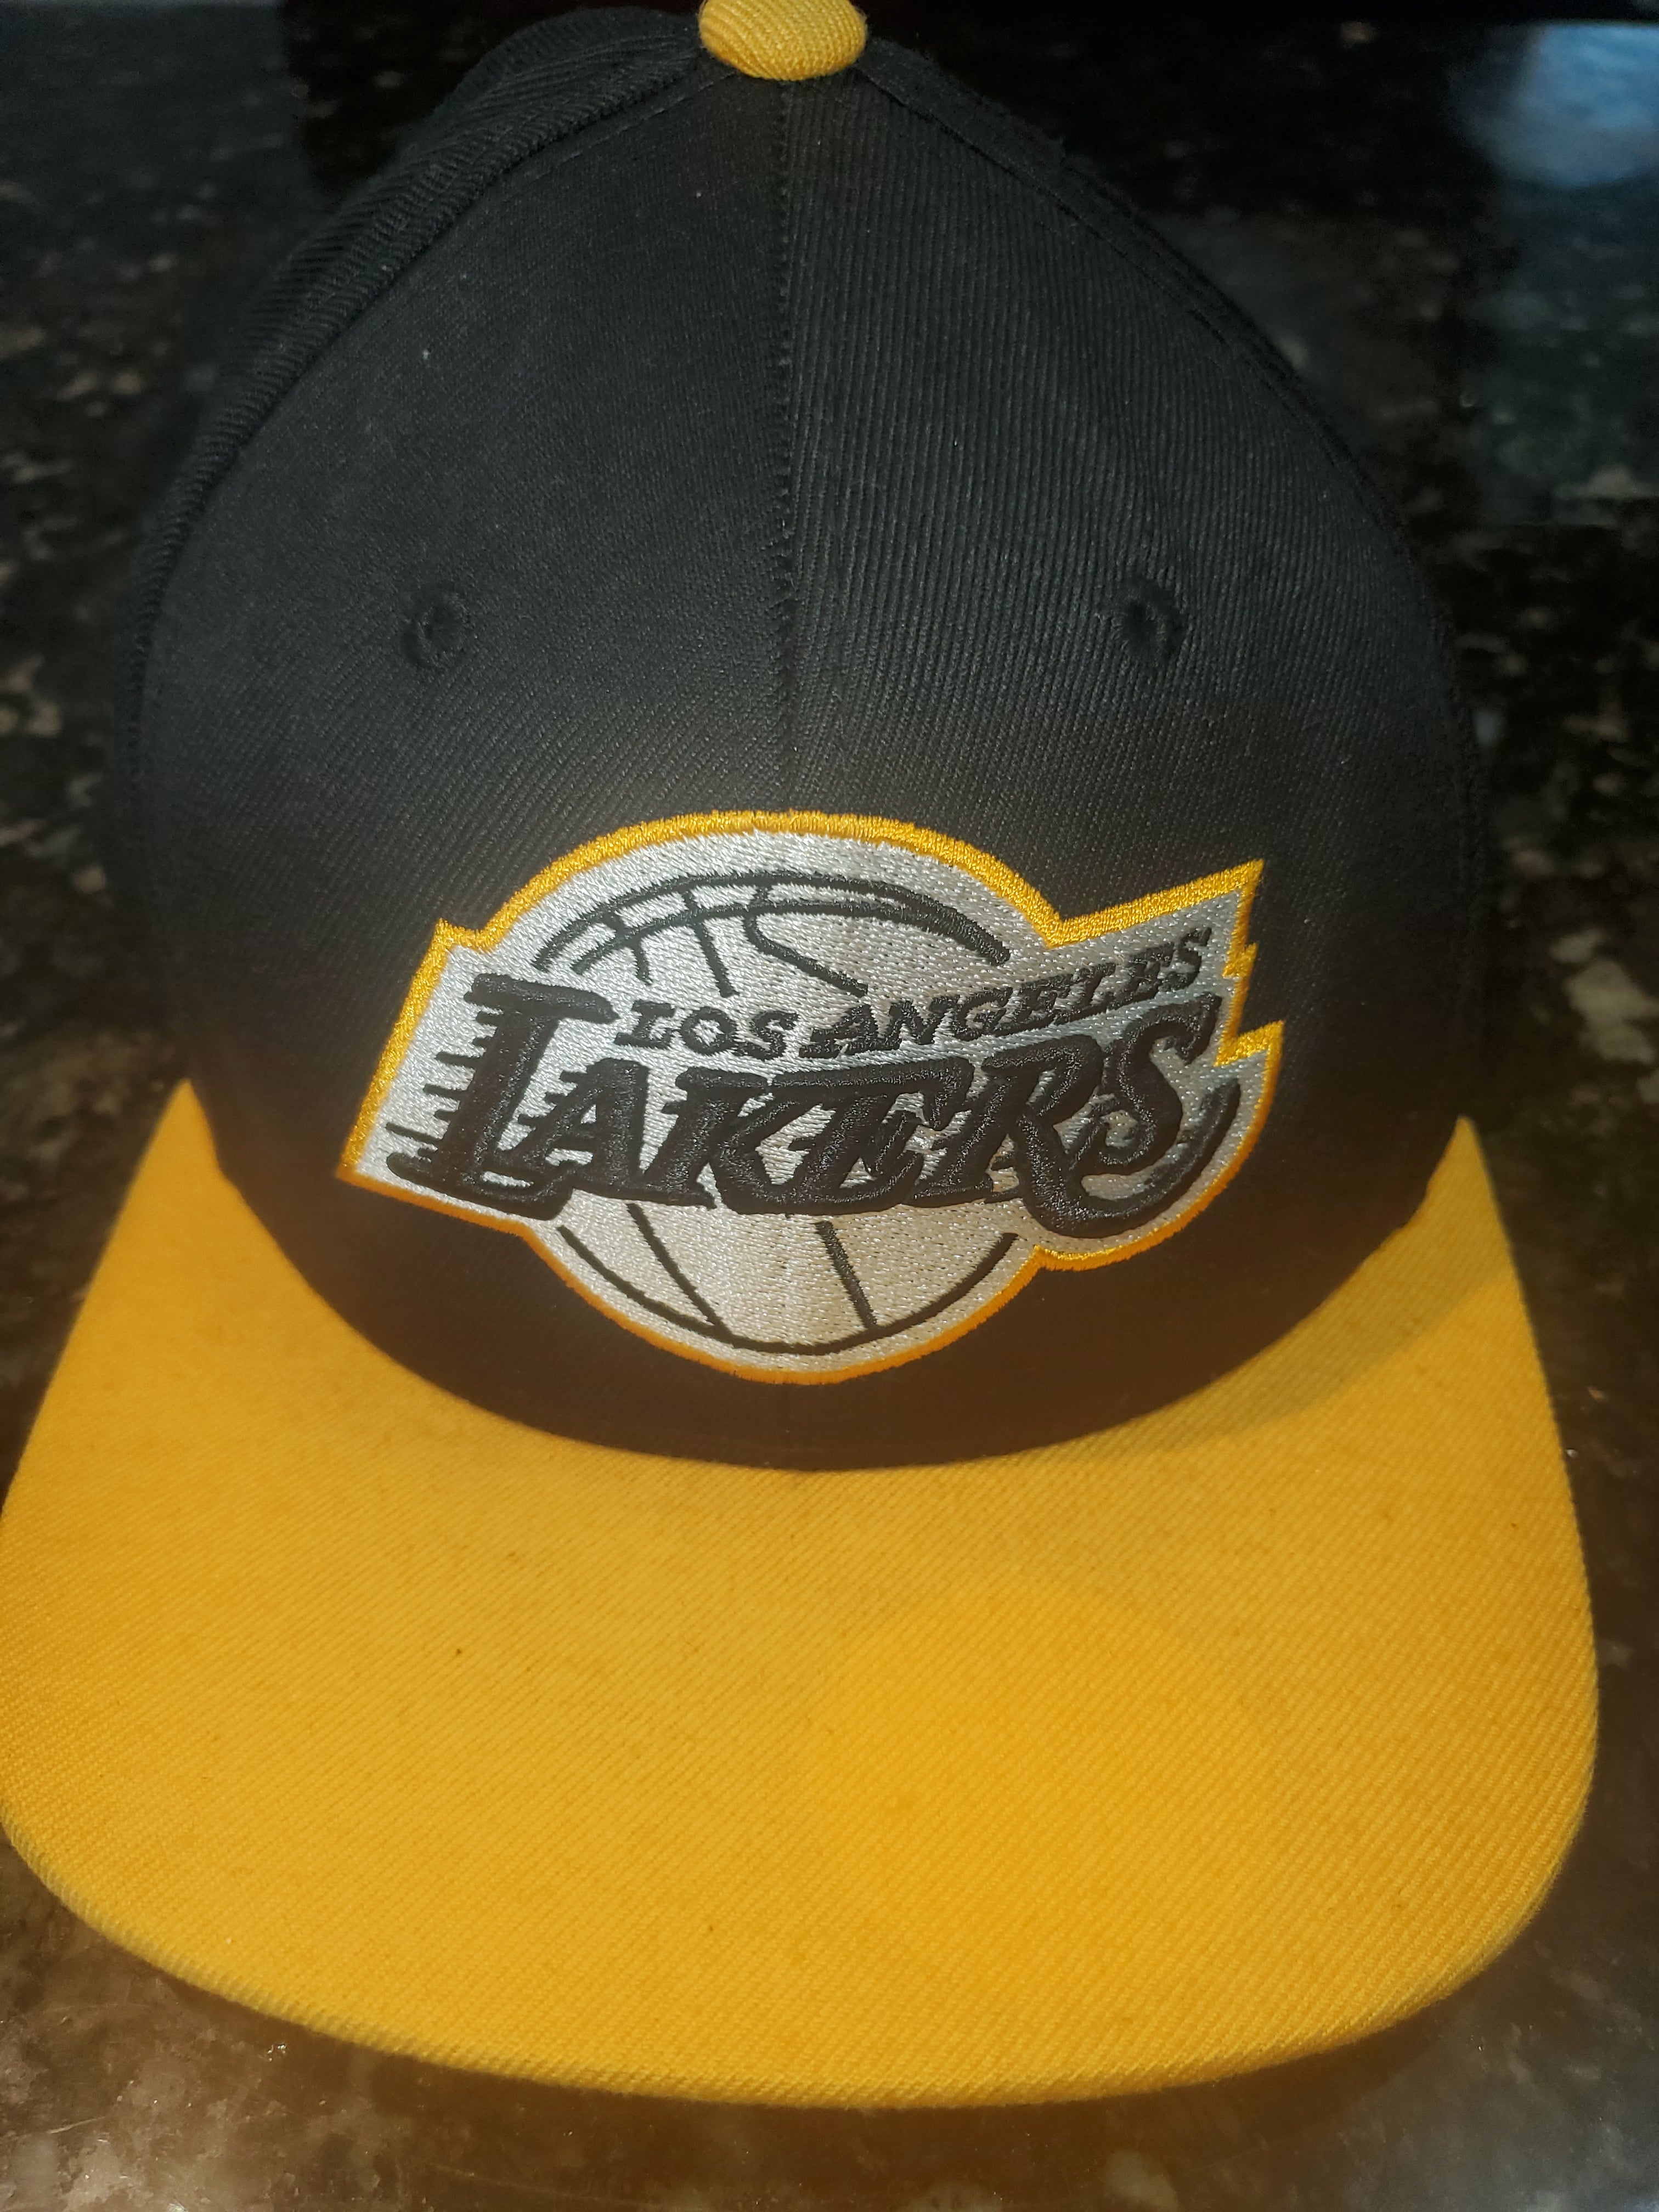 Los Angeles Lakers Vintage 80s Three Stripe Trucker Snapback Hat - 1987-1988 NBA Championship - White and Purple - One Size 